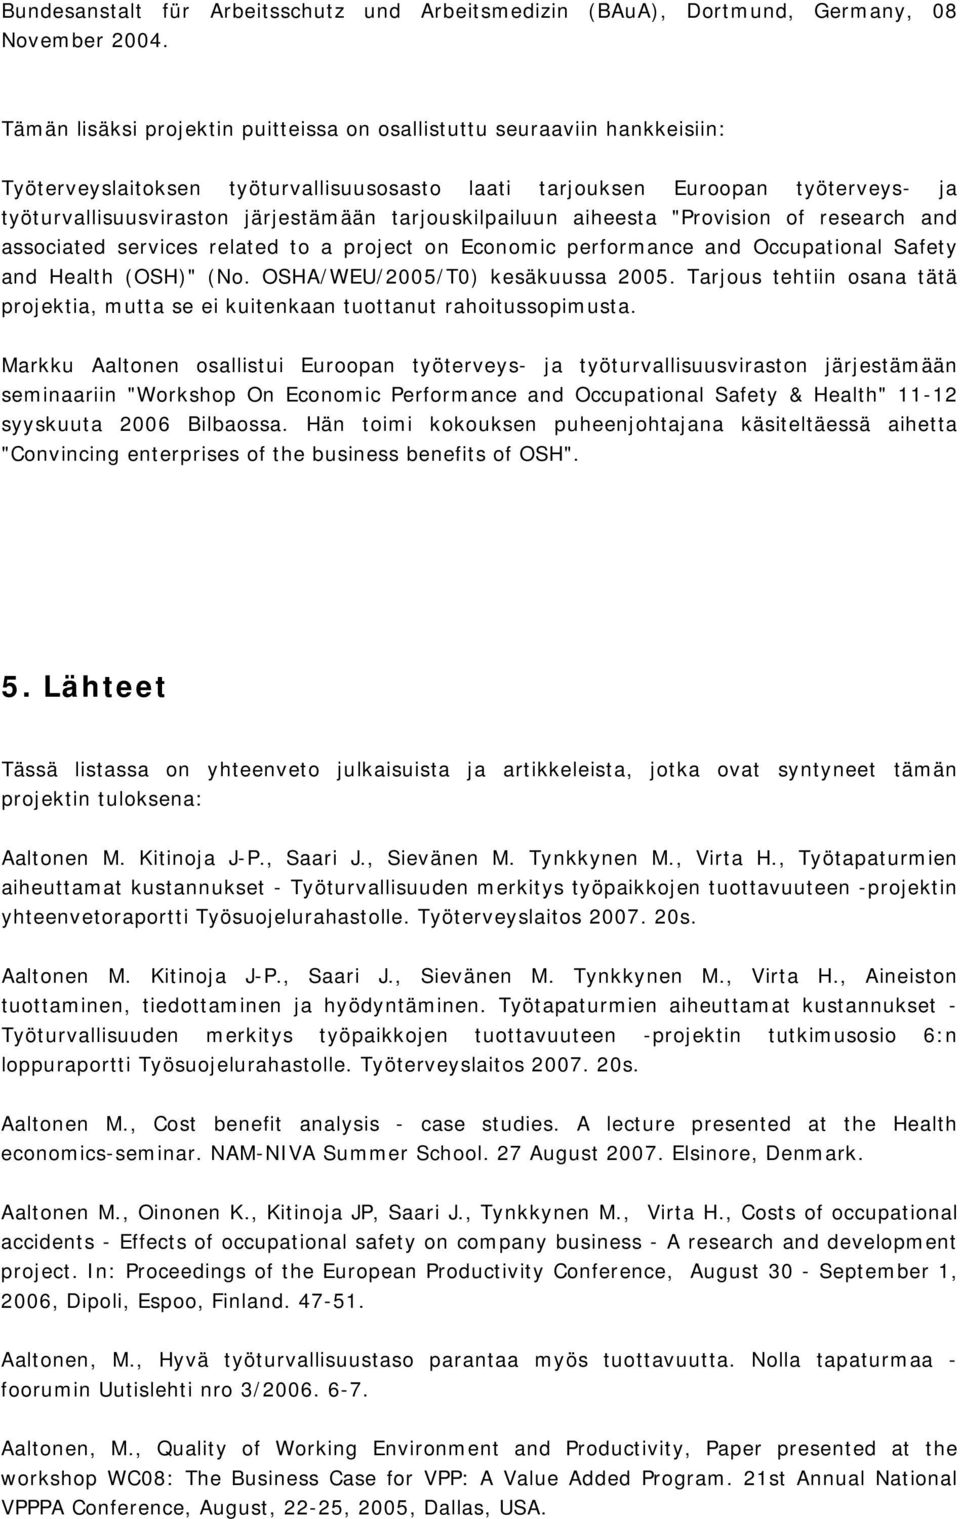 tarjouskilpailuun aiheesta "Provision of research and associated services related to a project on Economic performance and Occupational Safety and Health (OSH)" (No. OSHA/WEU/2005/T0) kesäkuussa 2005.